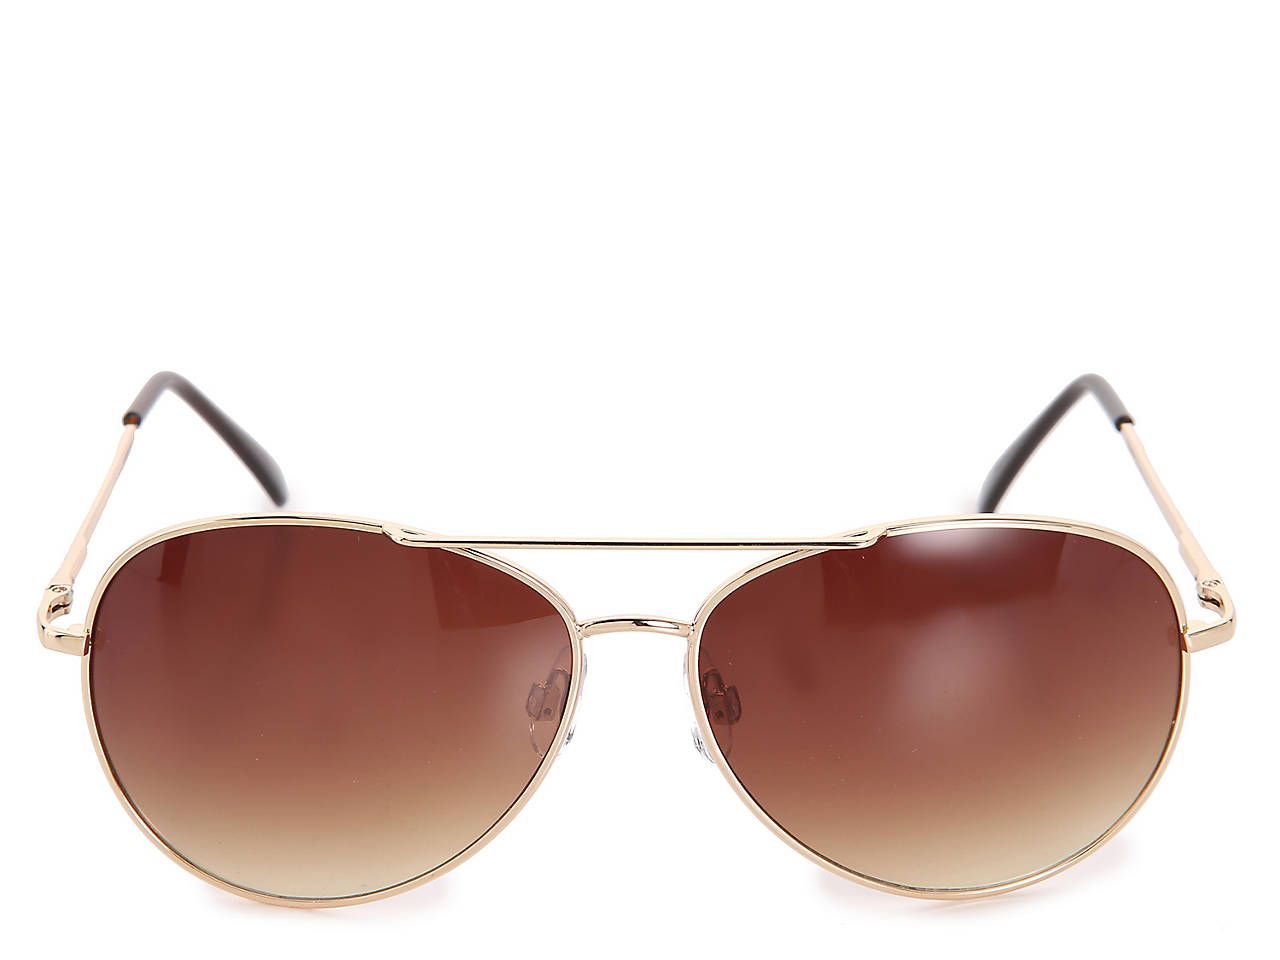 Chase Sunglasses | DSW